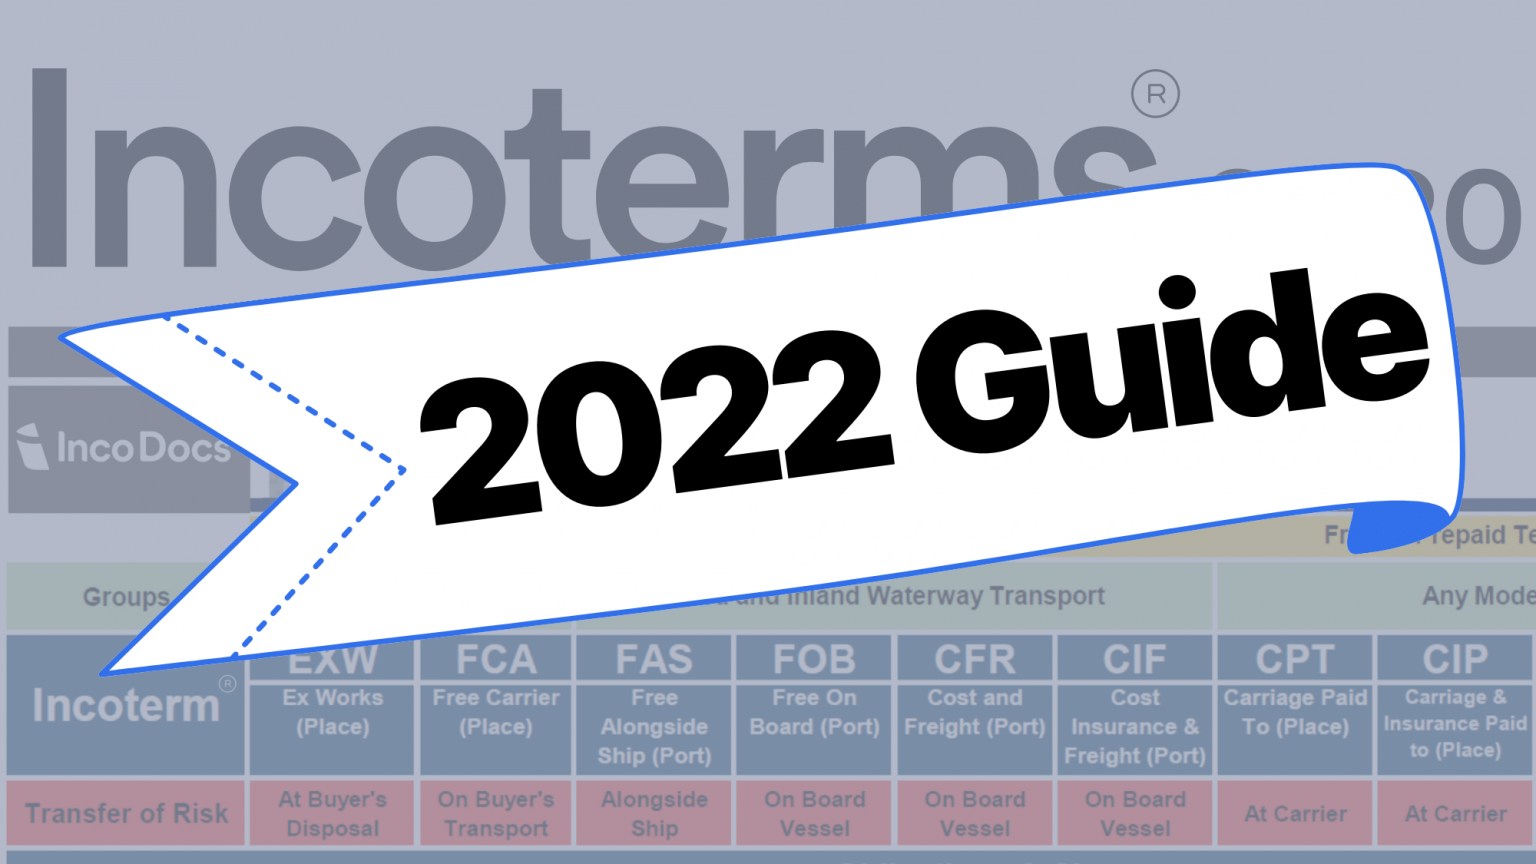 Incoterms® 2020 Explained The Complete Guide Incodocs 8225